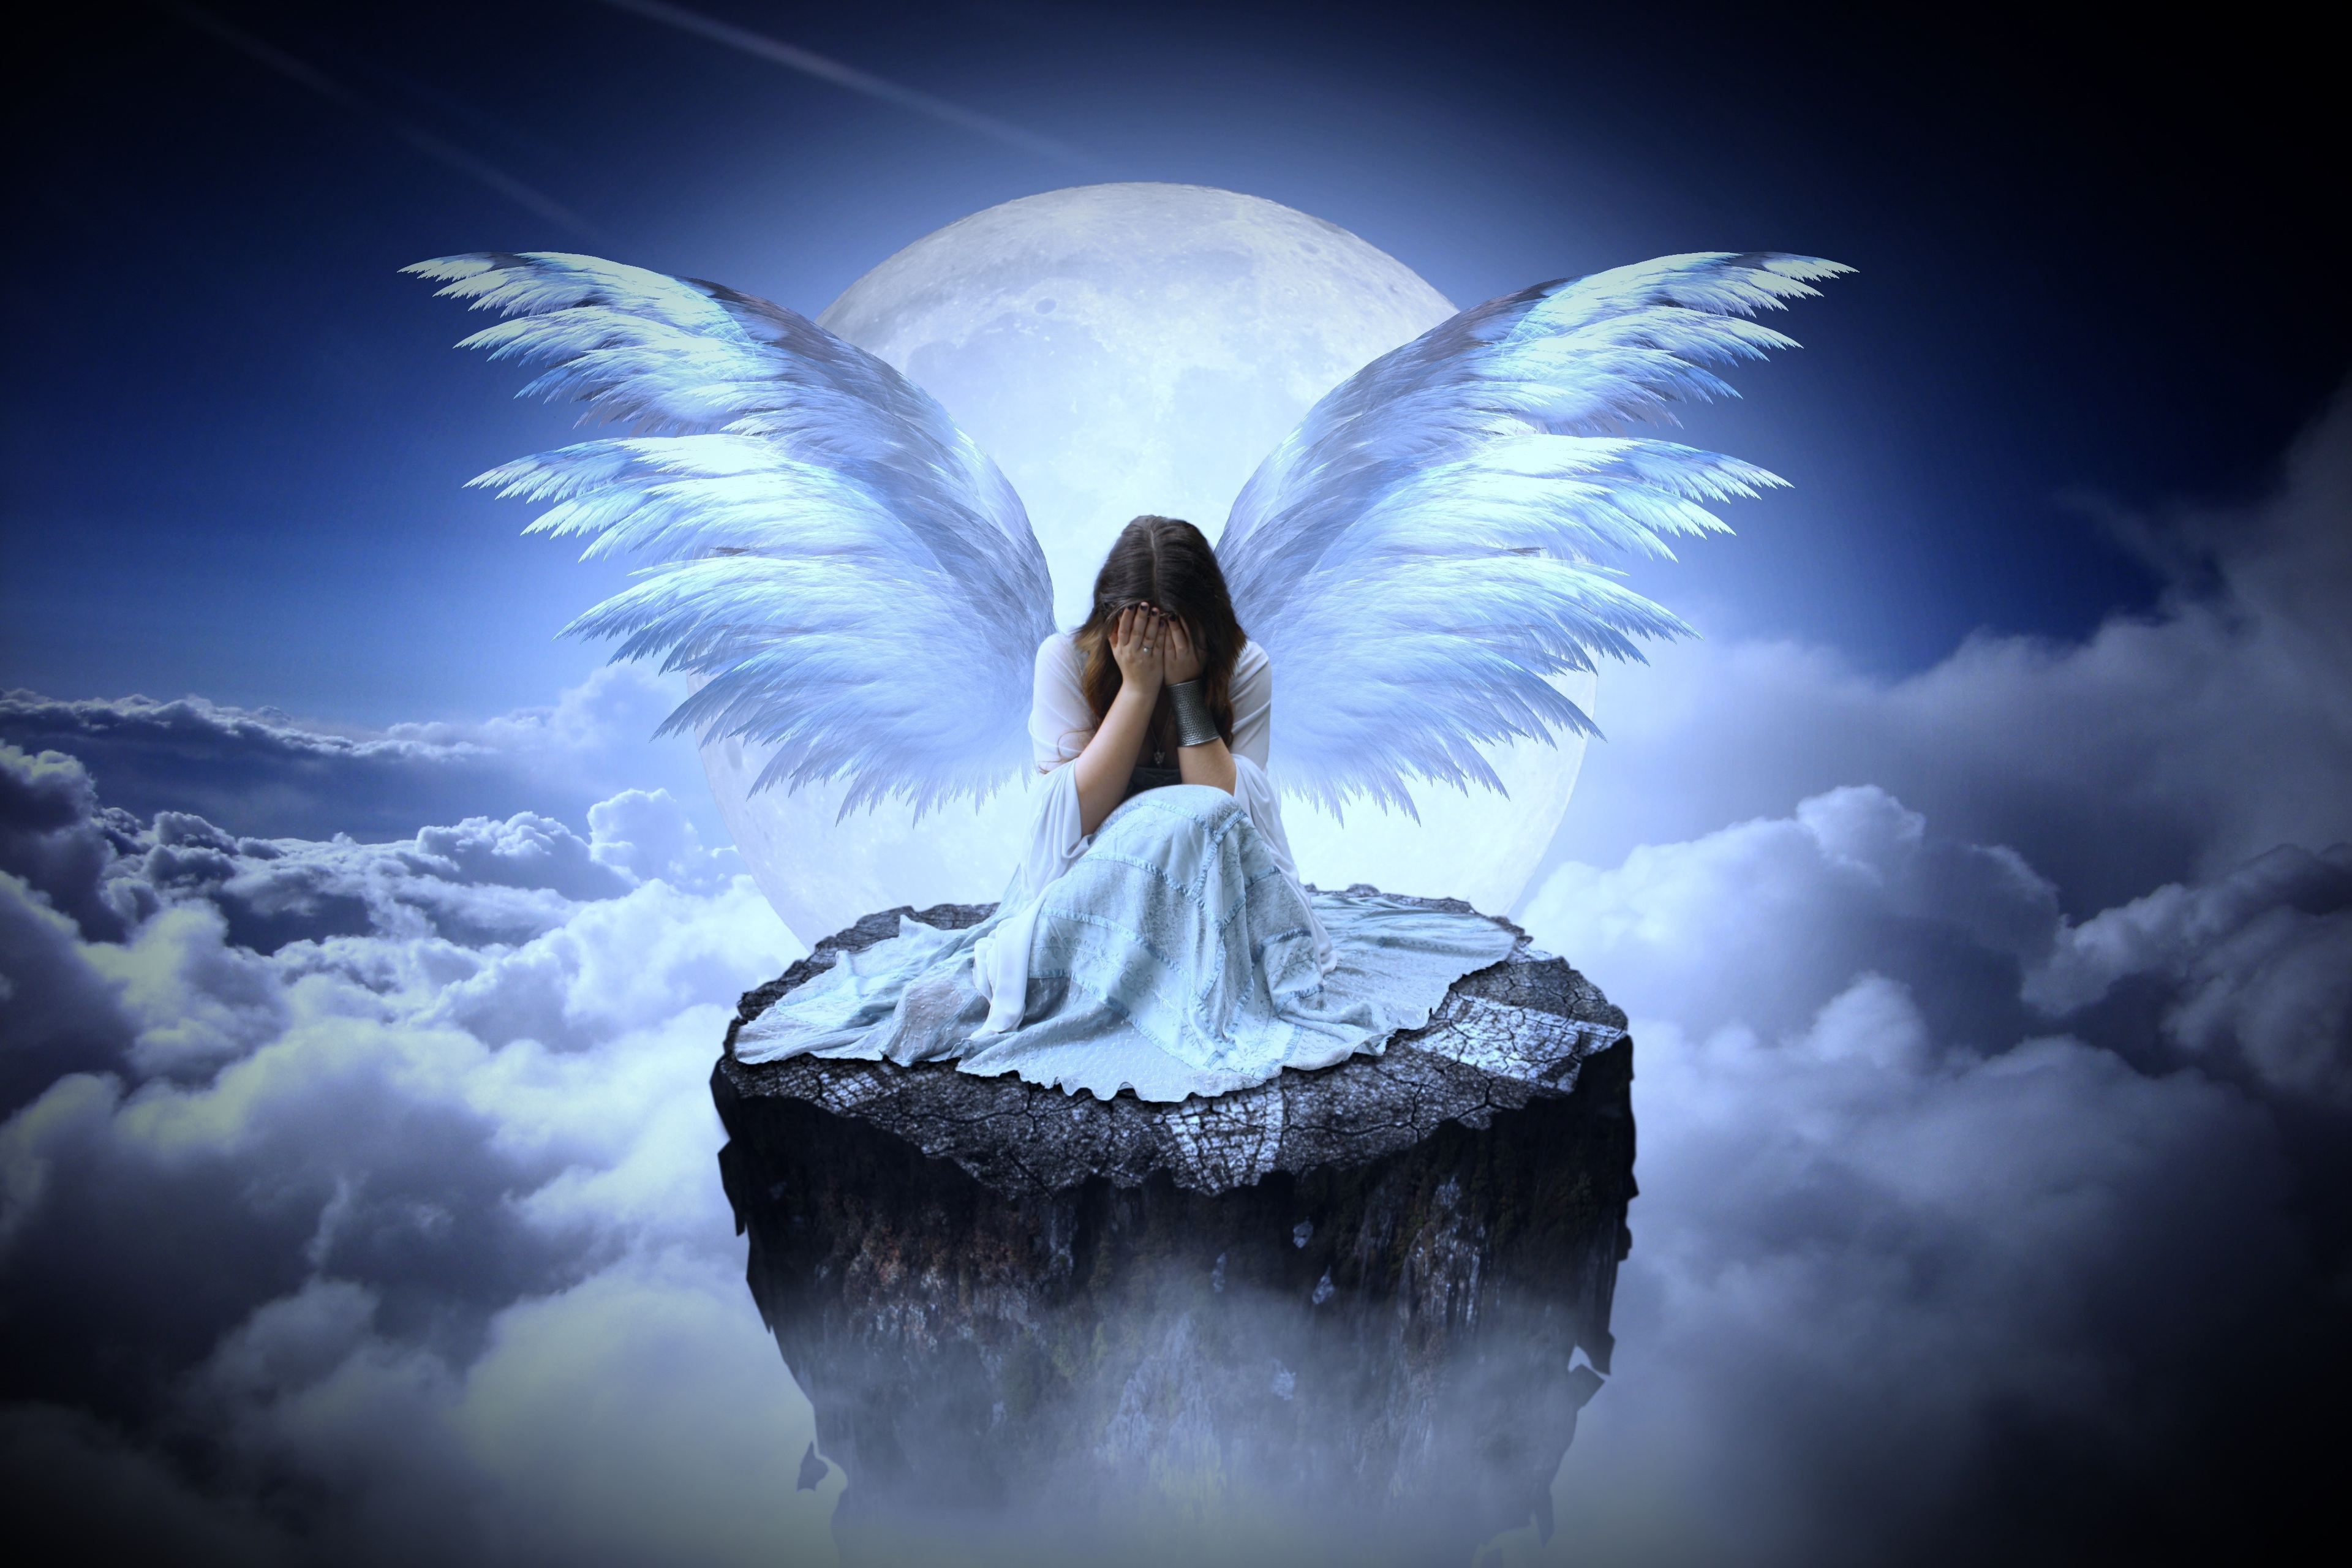 HD wallpaper, Moon, Surreal, Eyes Closed, Fairy, Sad Woman, Above Clouds, Clouds, Angel Wings, Sad Girl